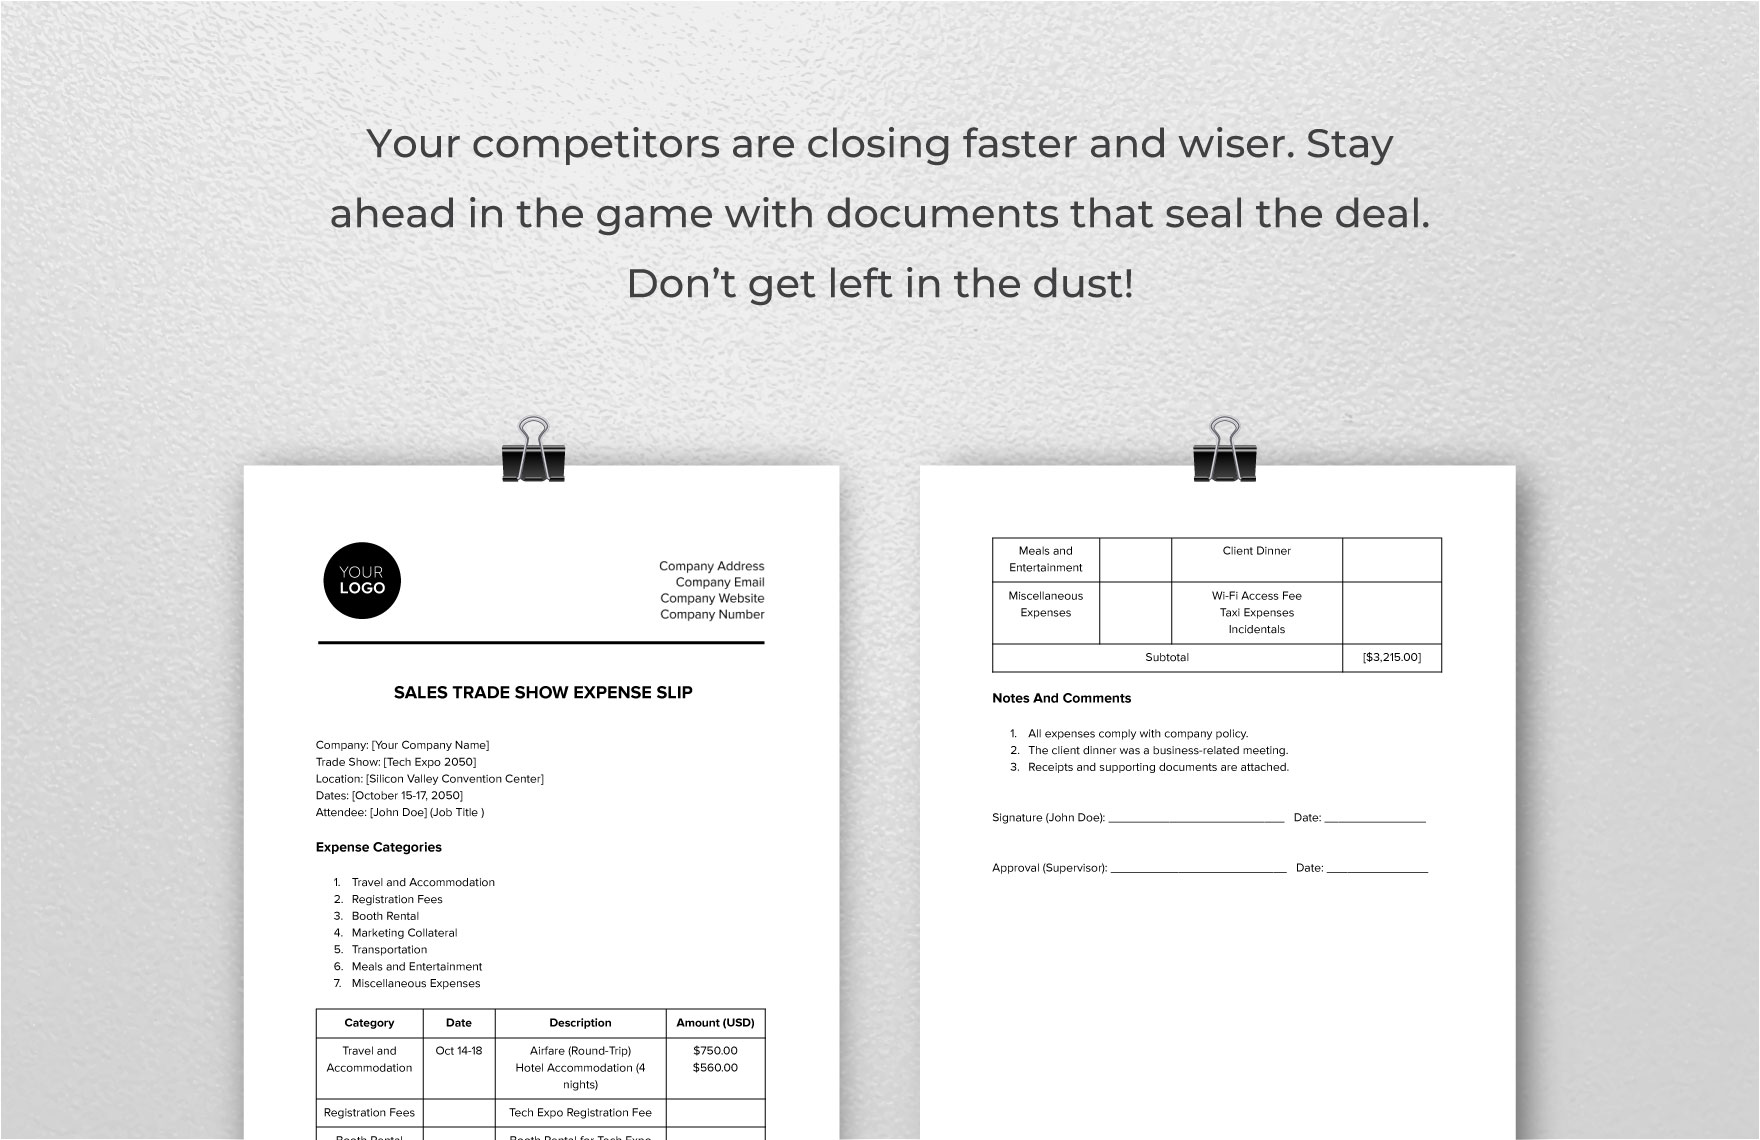 Sales Trade Show Expense Slip Template